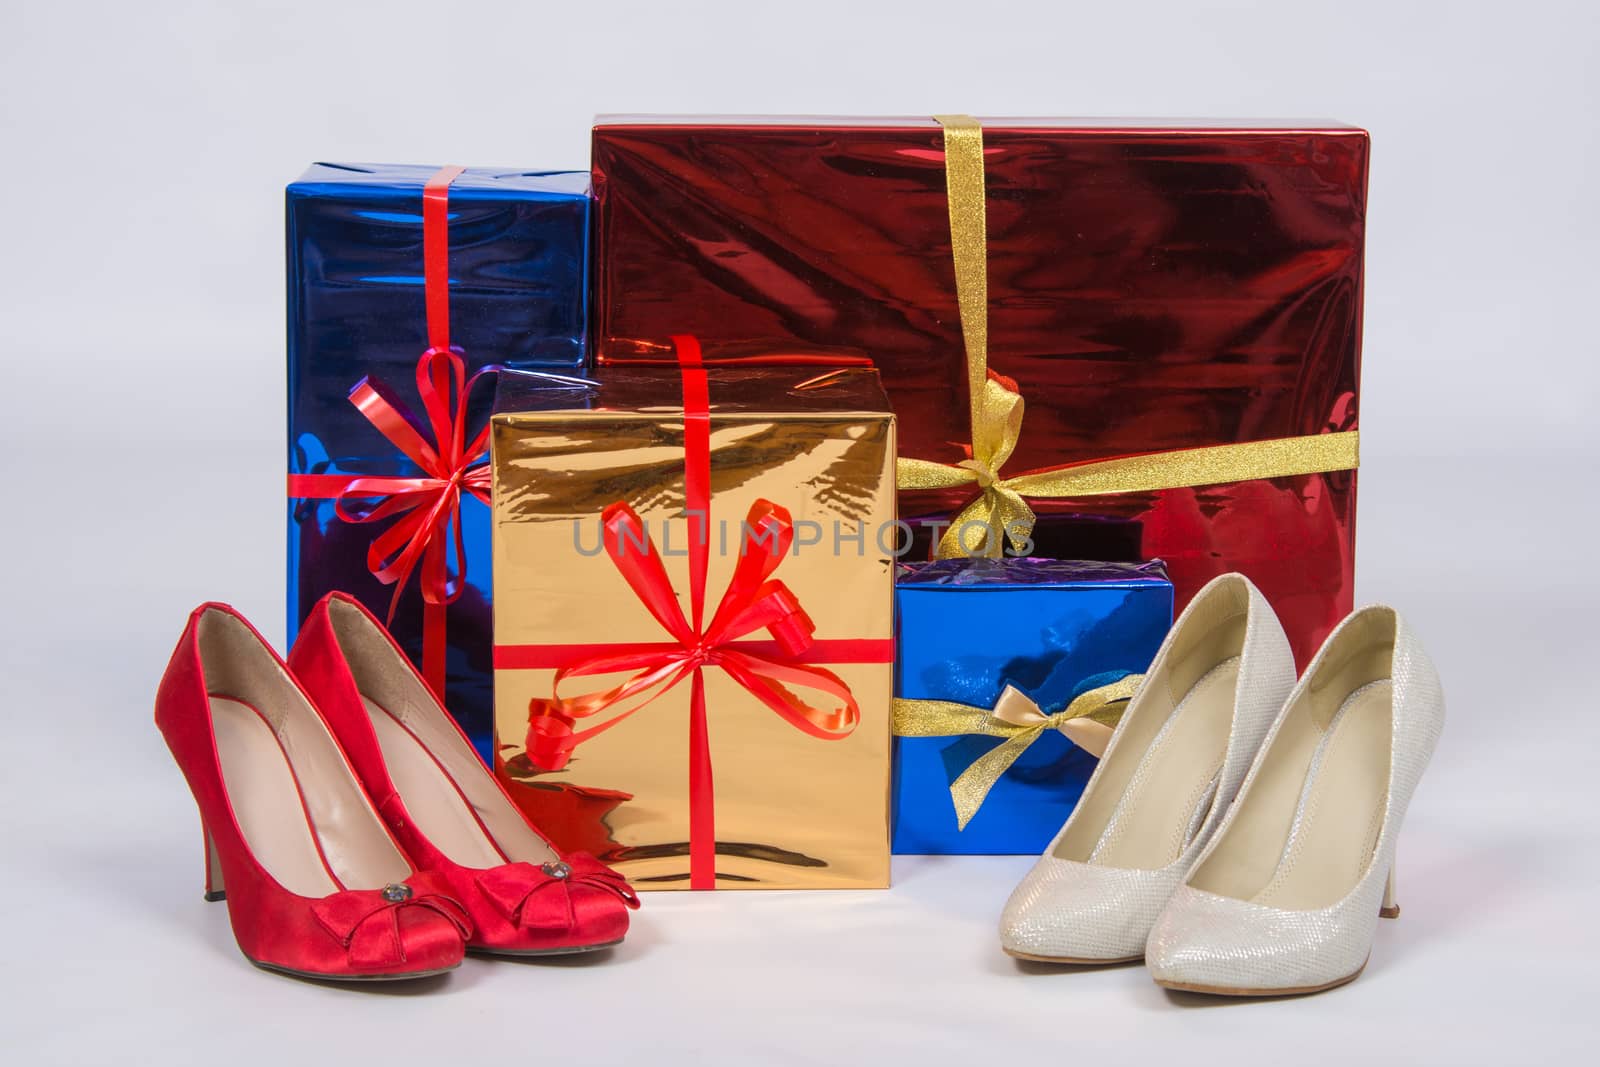 Red and white female shoes with high heels, standing near boxes with gifts